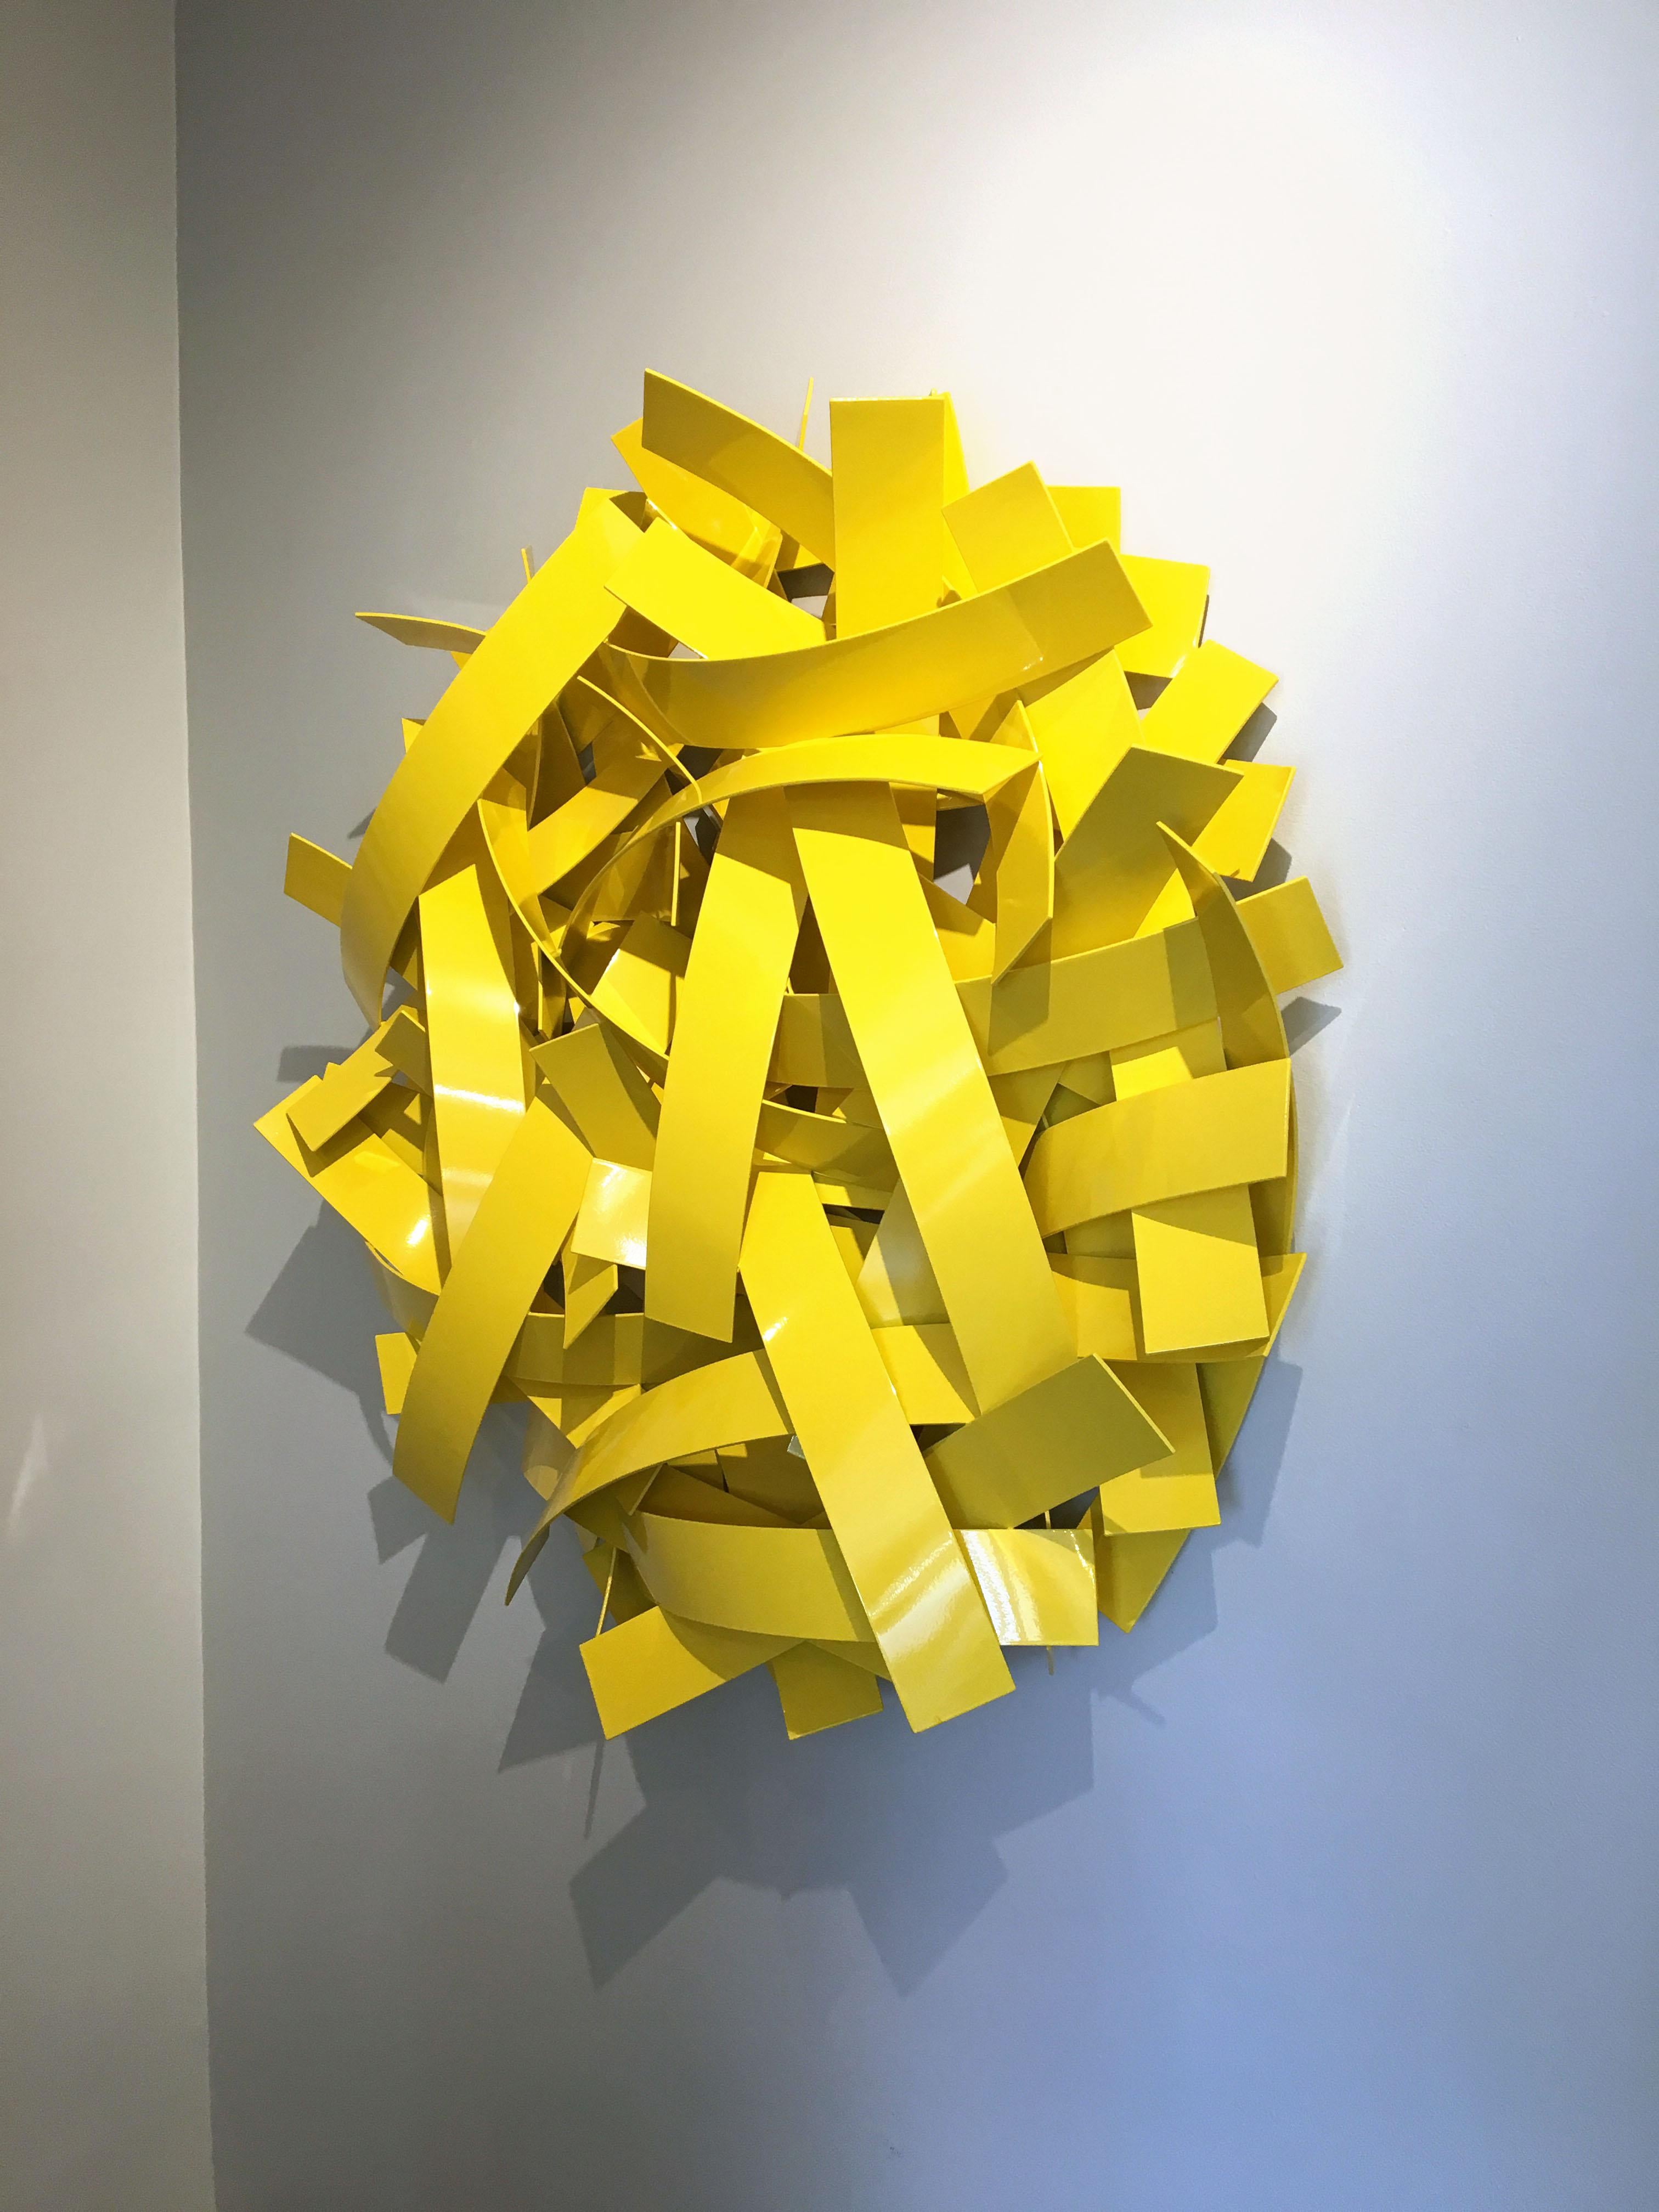 93 Million Miles #3 (Indoor and Outdoor Yellow Abstract Sculpture) 2